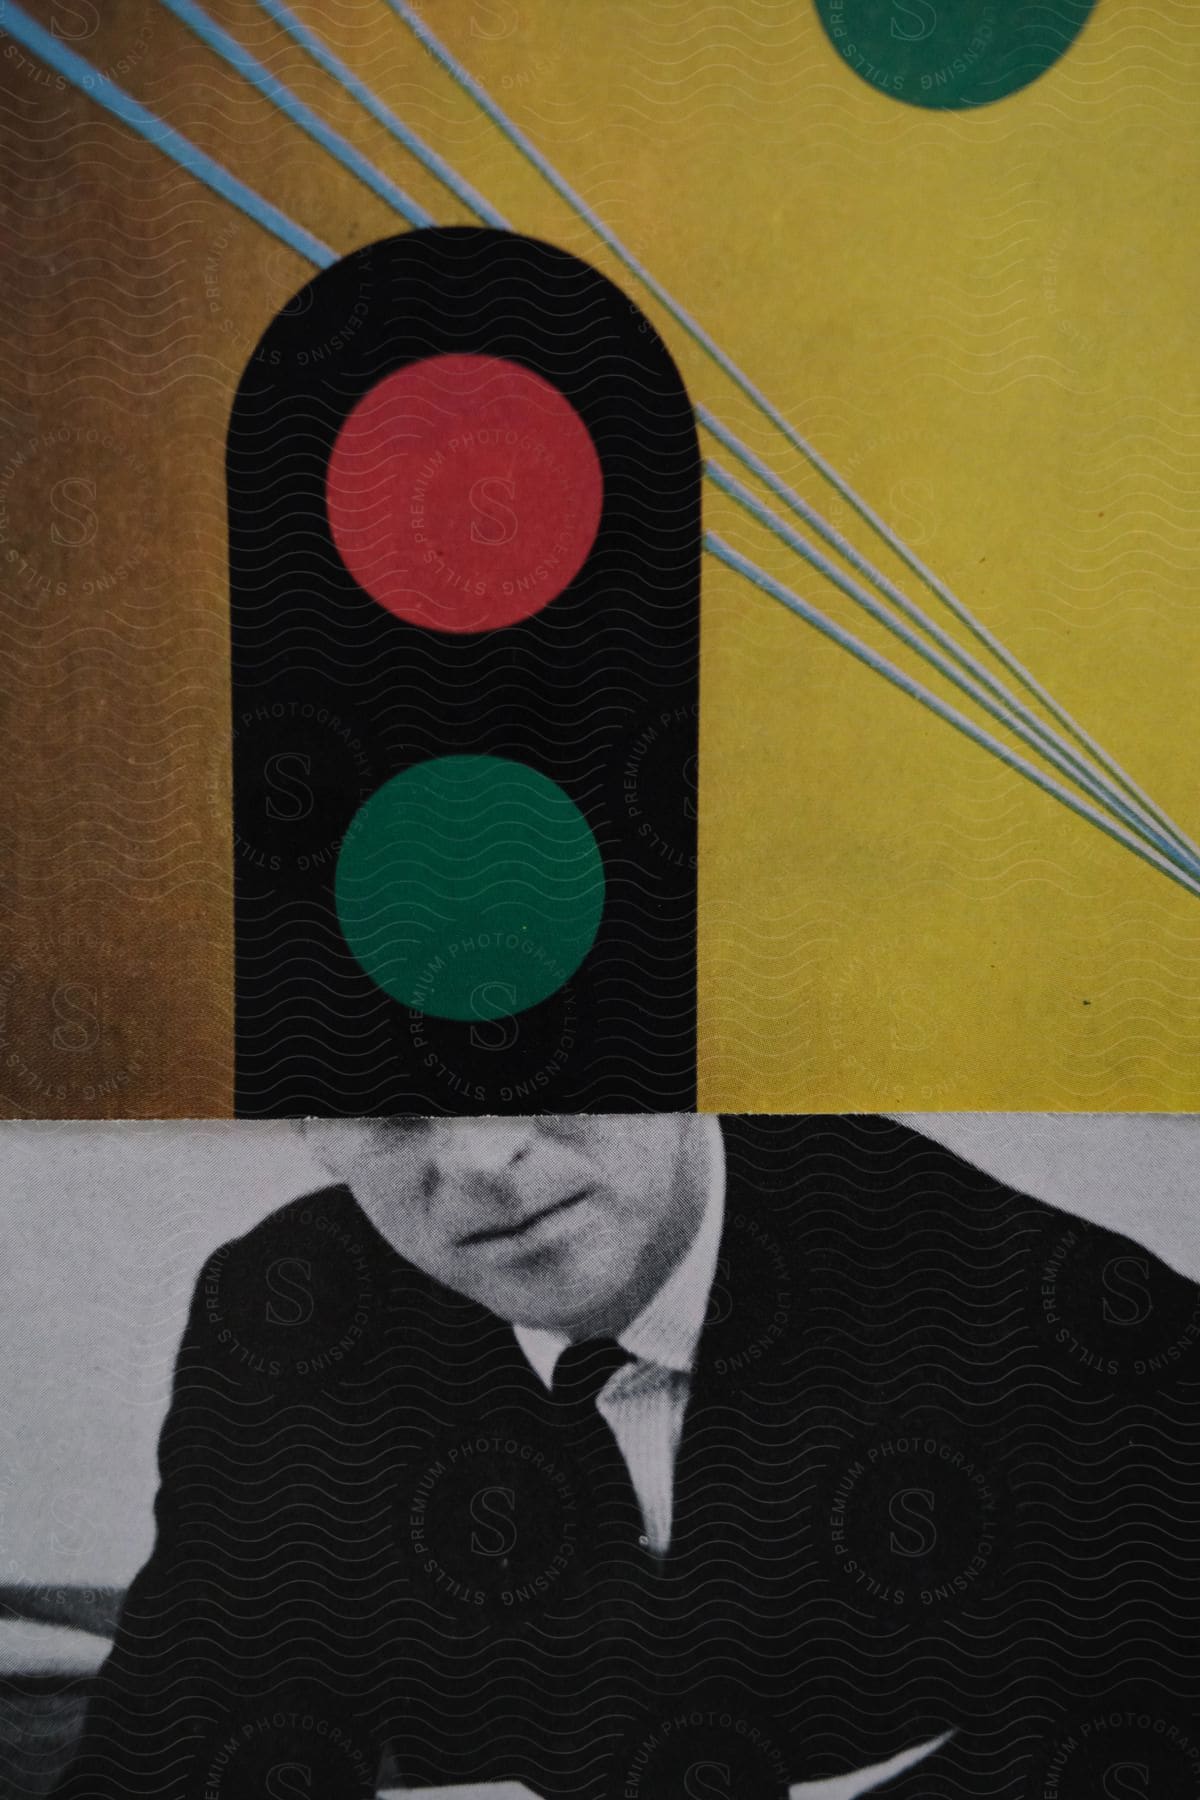 An abstract composition of a traffic light on a black and white photo of a man in a suit